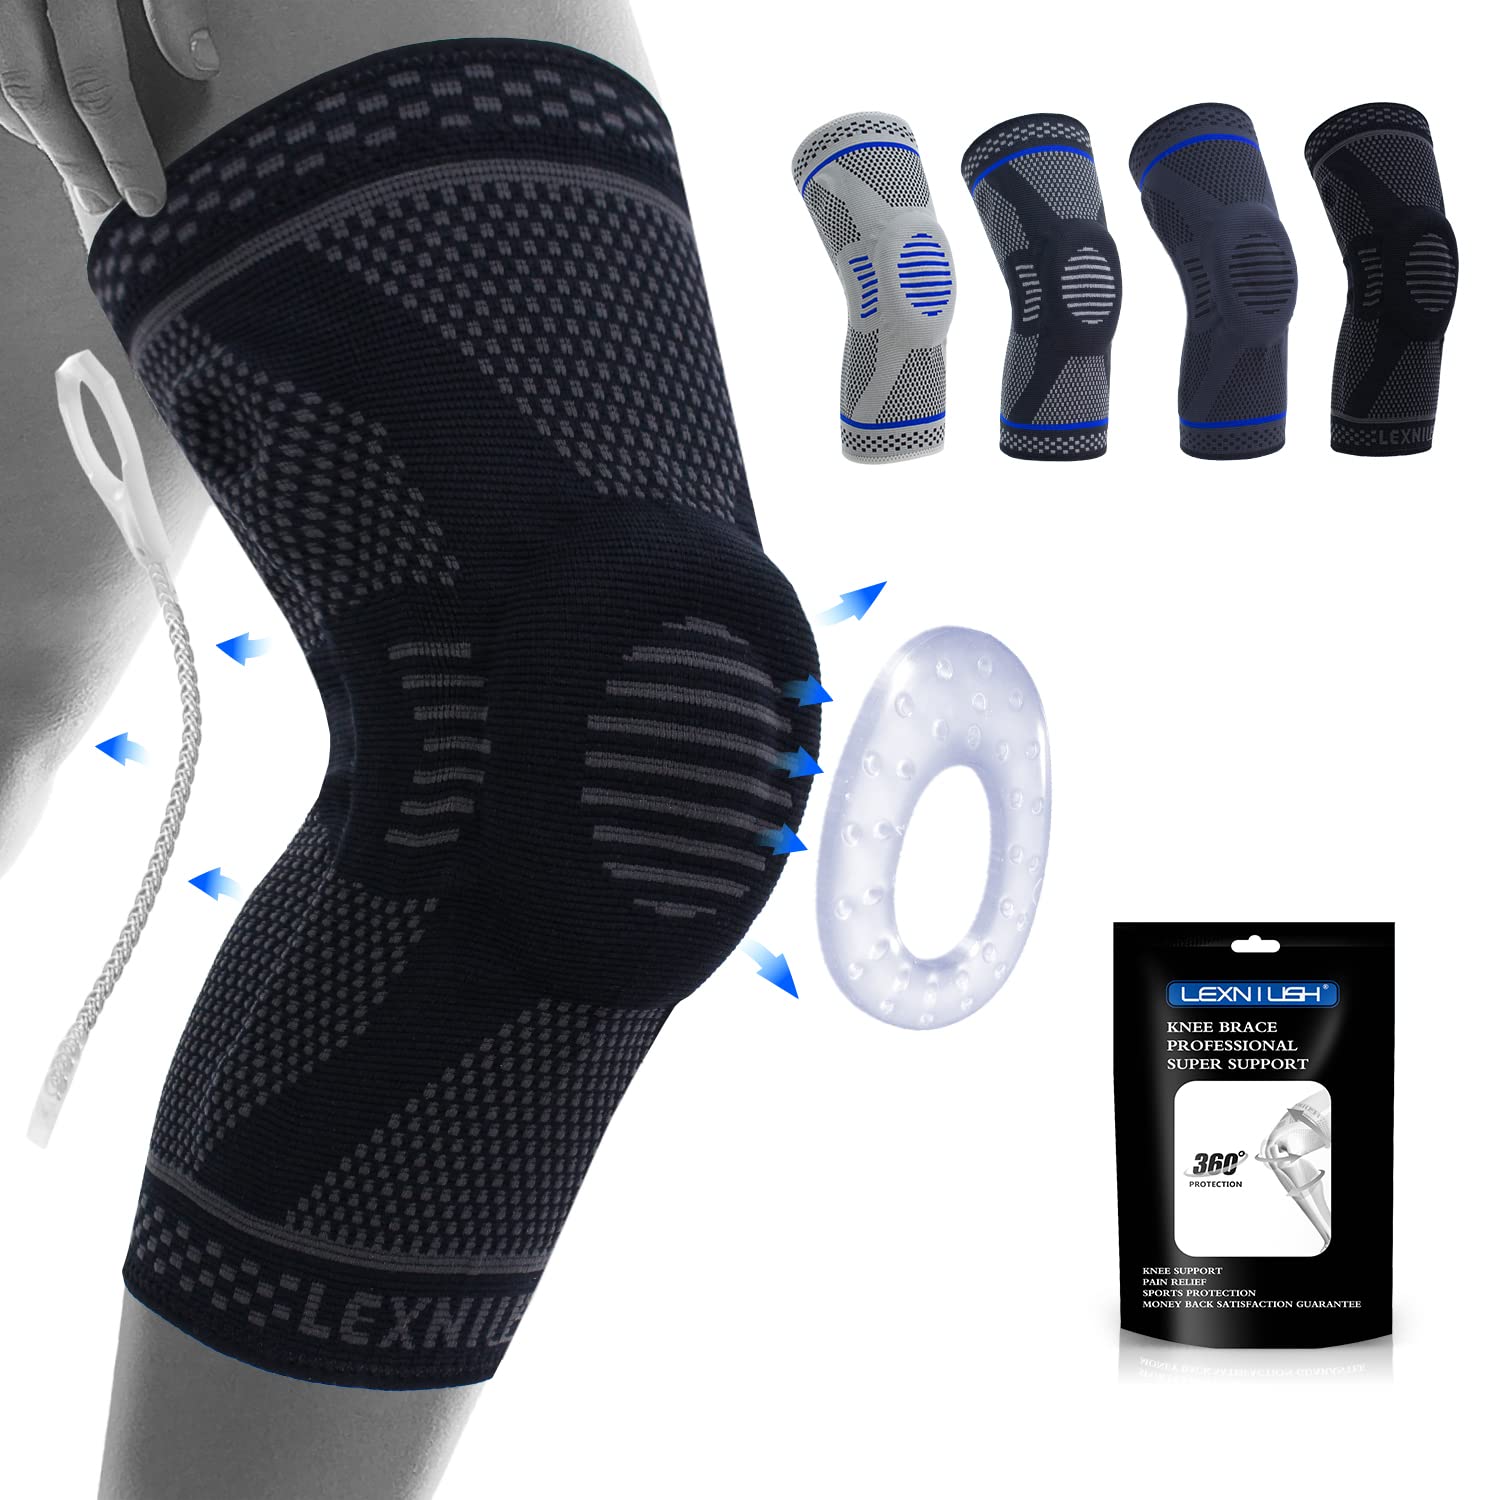 Best Knee braces for torn meniscus and cartilage injuries